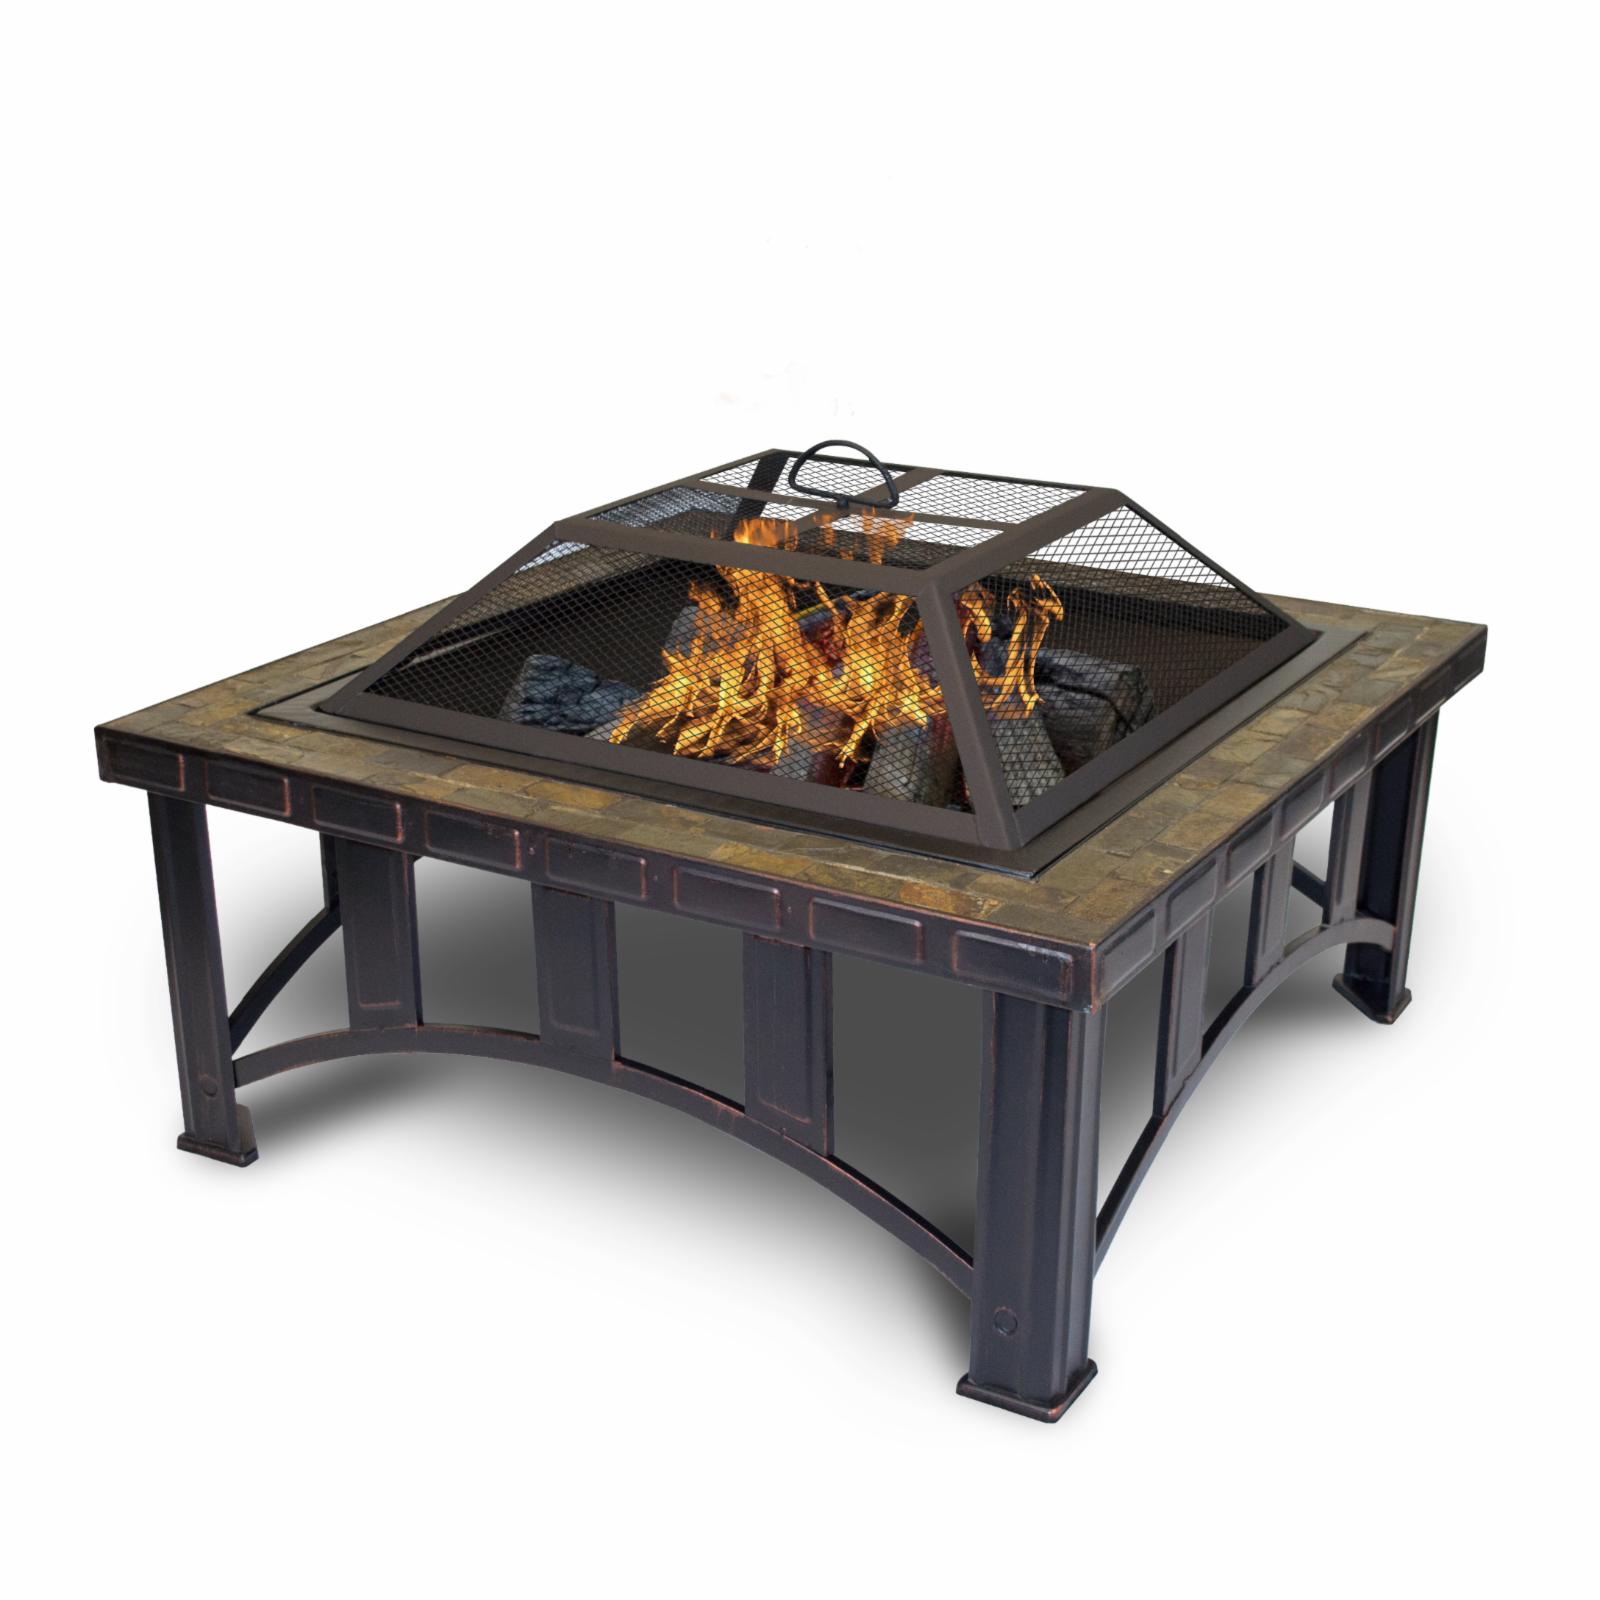 Outdoor Leisure Products Decorative Slate 30 inch Square Steel Fire Pit - image 1 of 7